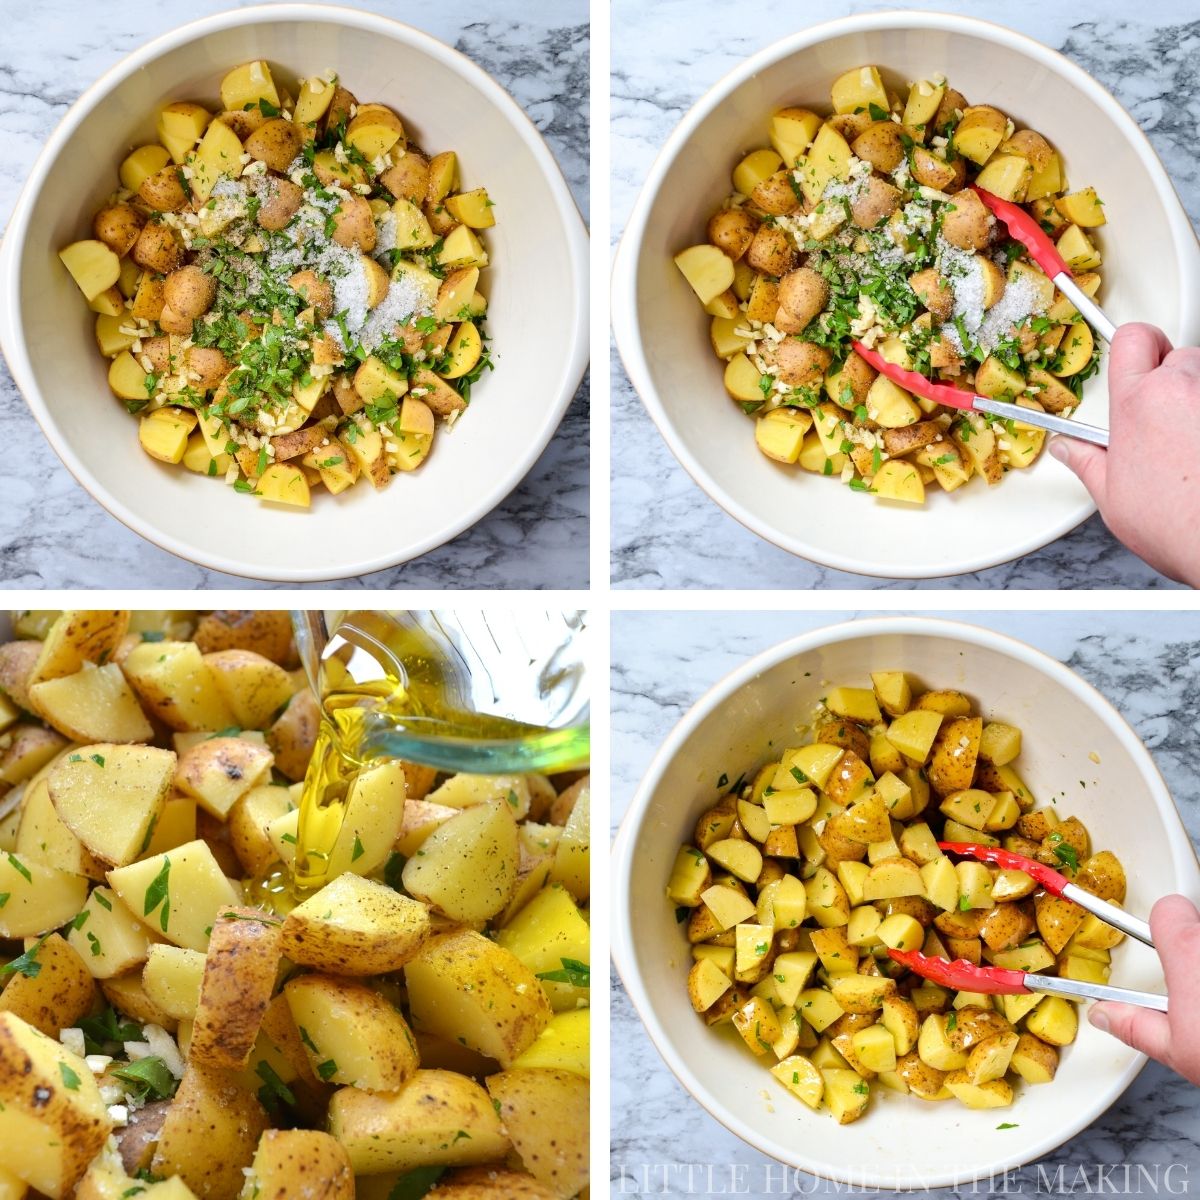 Baby yellow potatoes, tossed with oil, parsley, and seasonings.